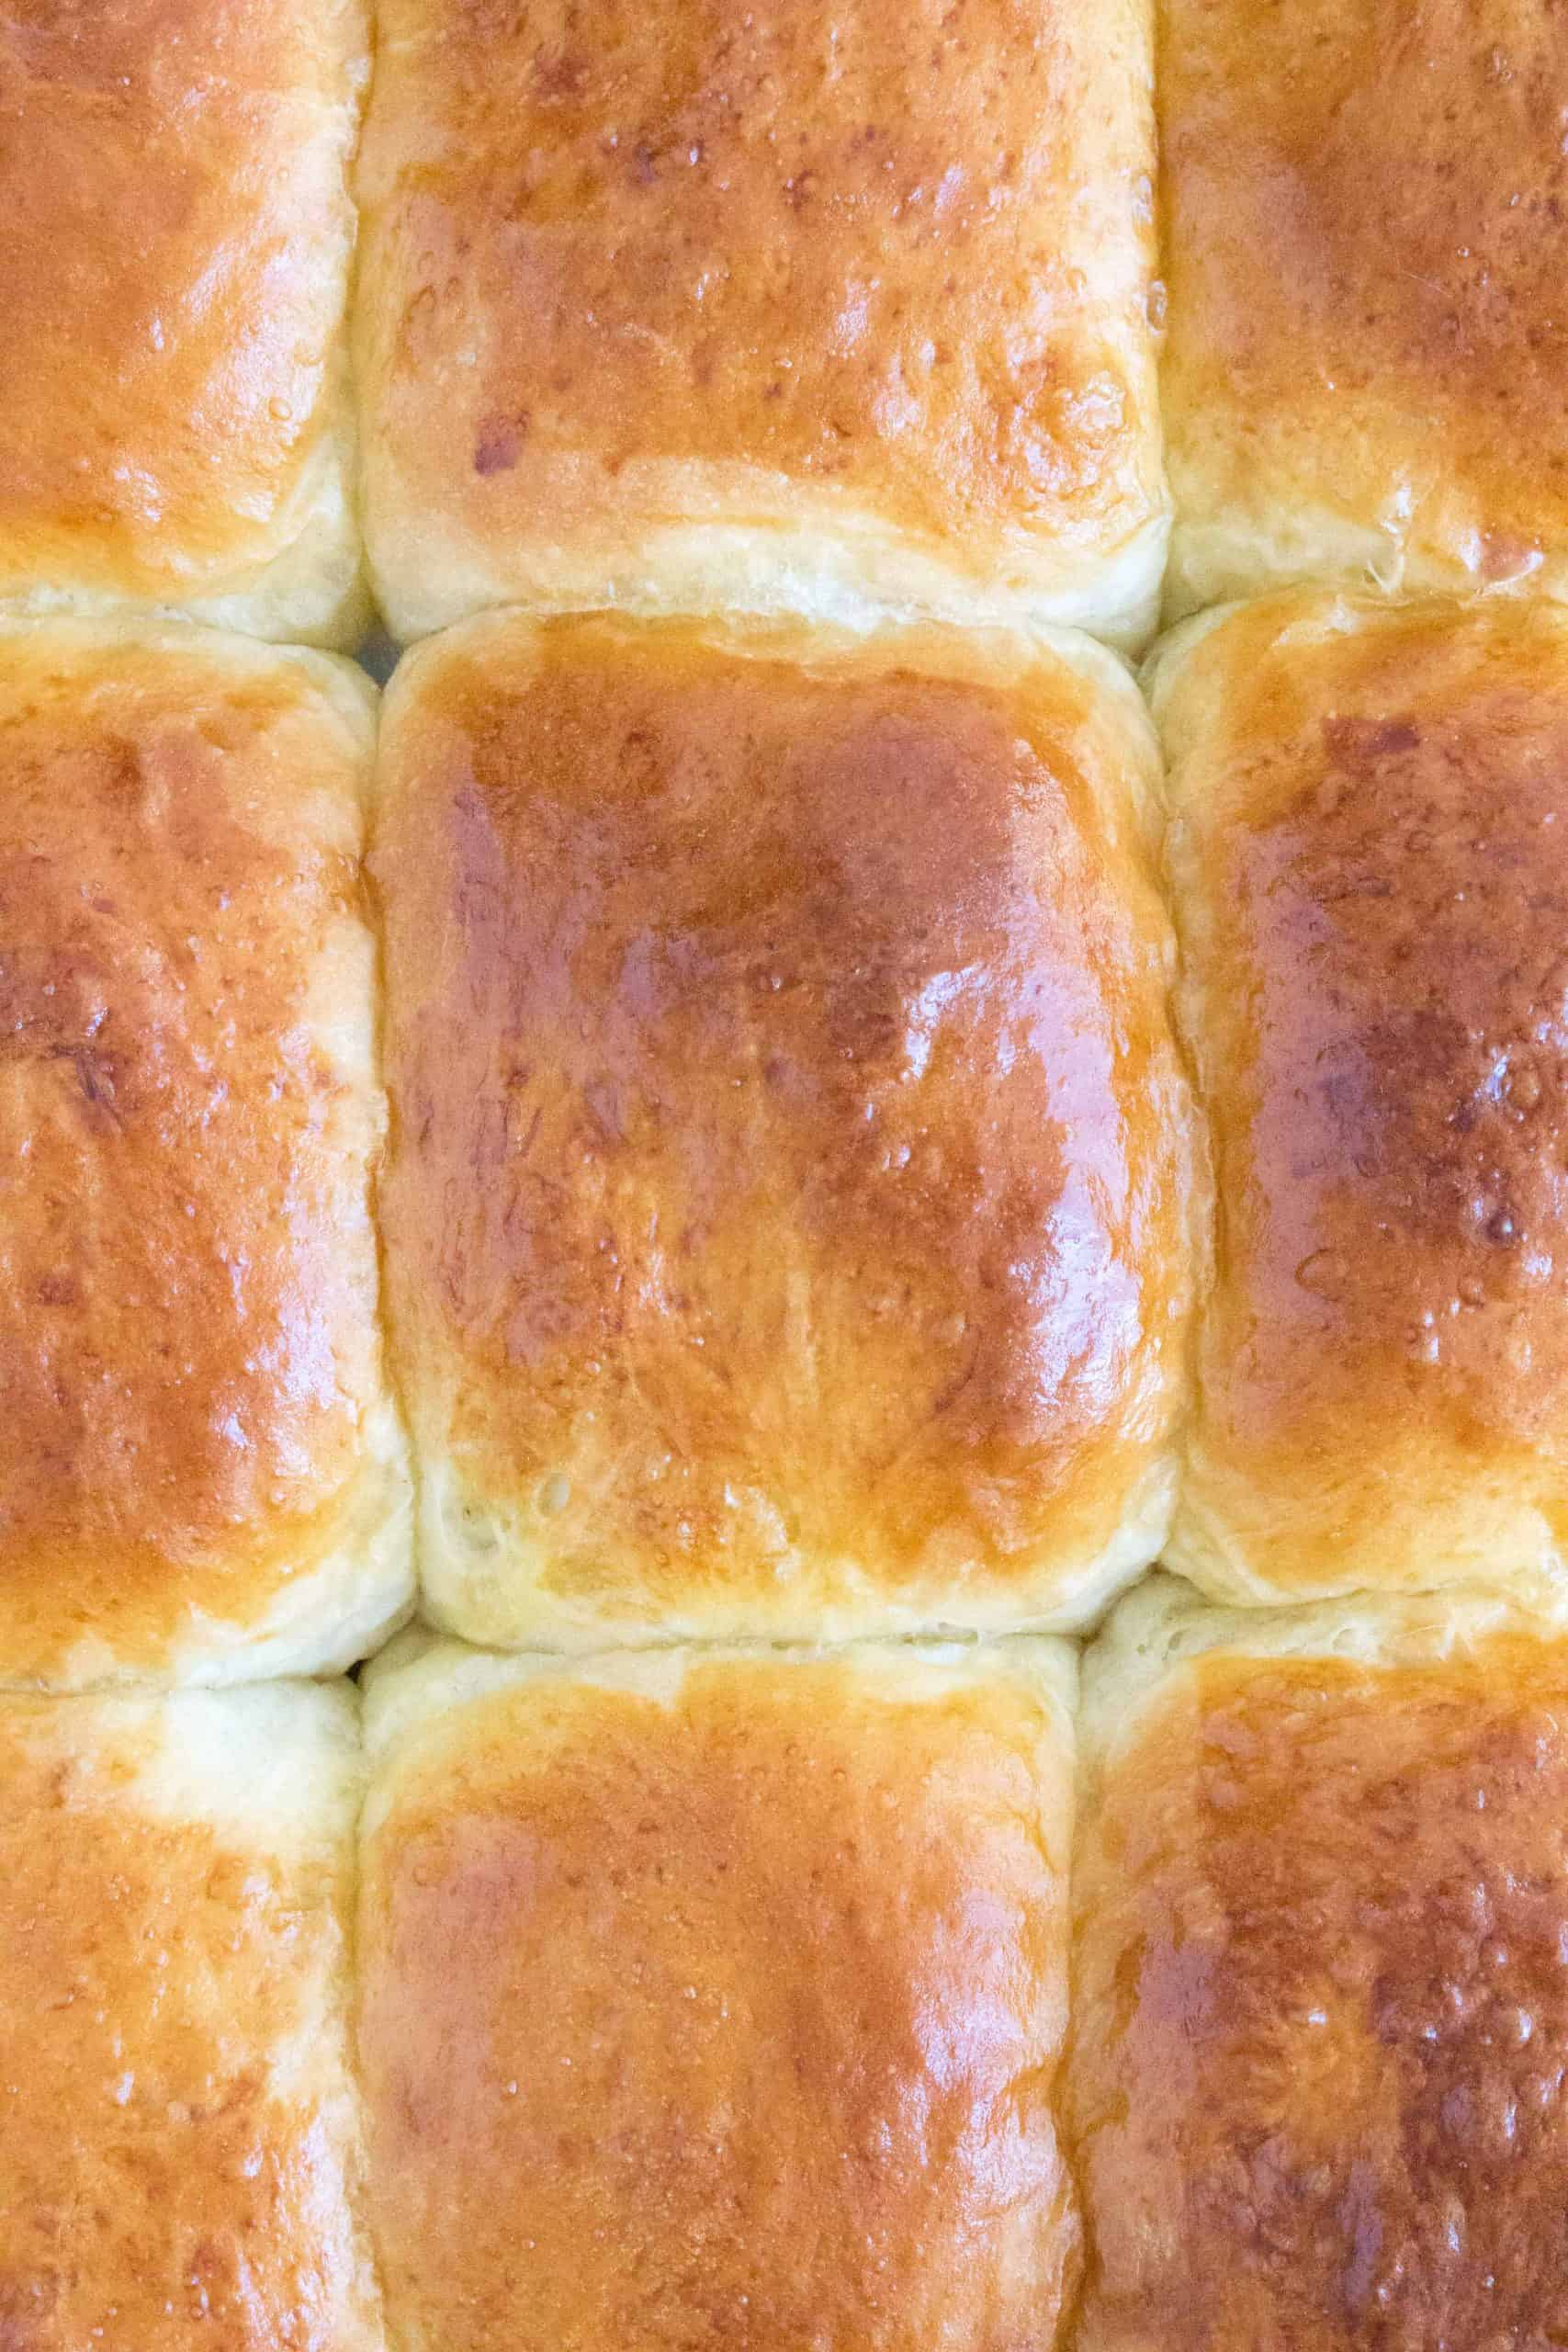 Here's how you can make fluffy, pillowy soft Hokkaido style milk bread rolls at home with this simple recipe. The perfect make ahead bread as they stay soft for days!